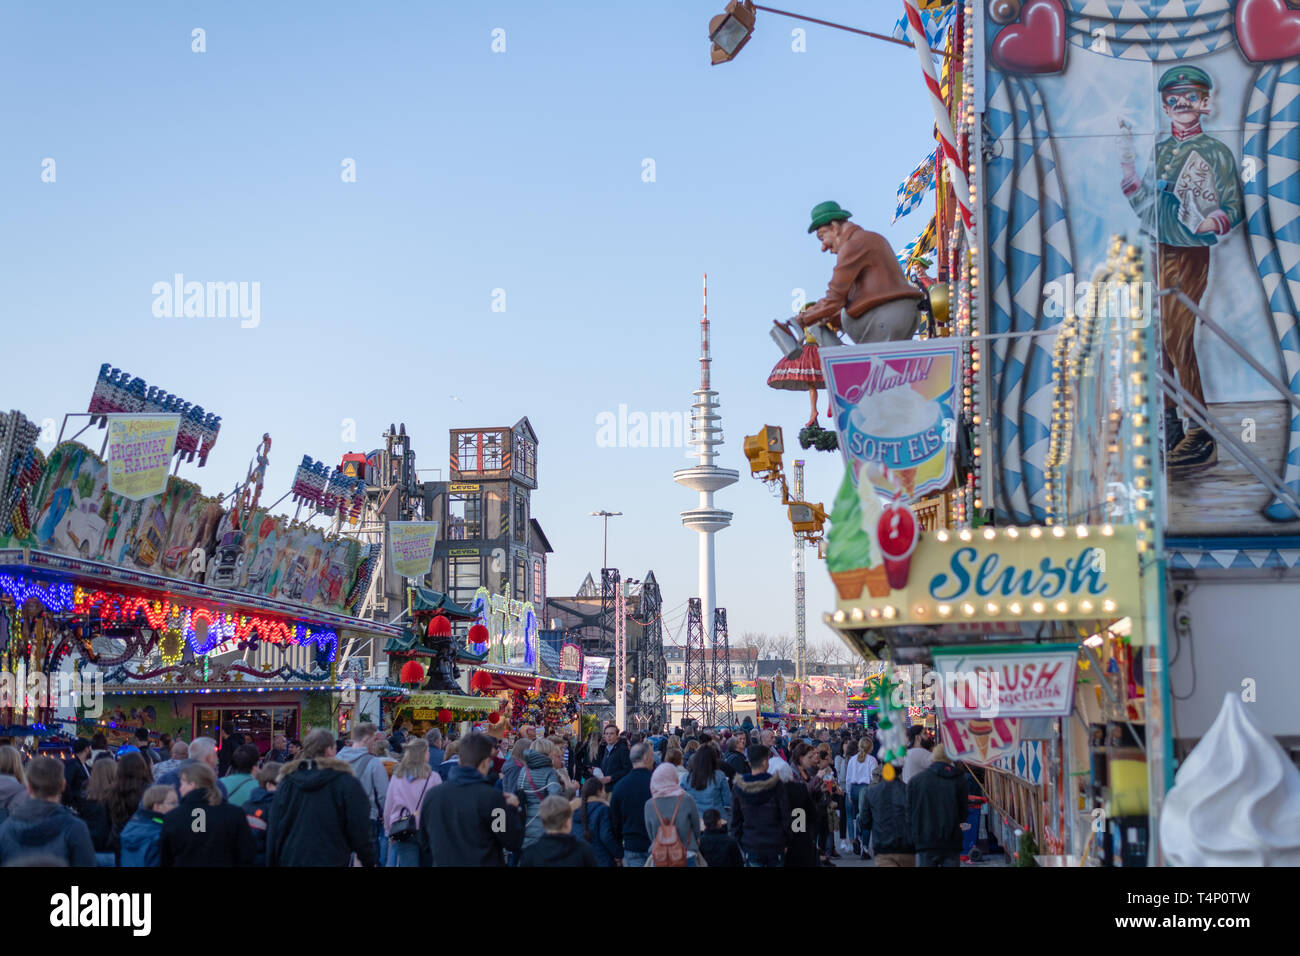 Hamburg, Germany - People walking on the streets in the amusement park DOM, on both sides of various entertainment facilities Stock Photo